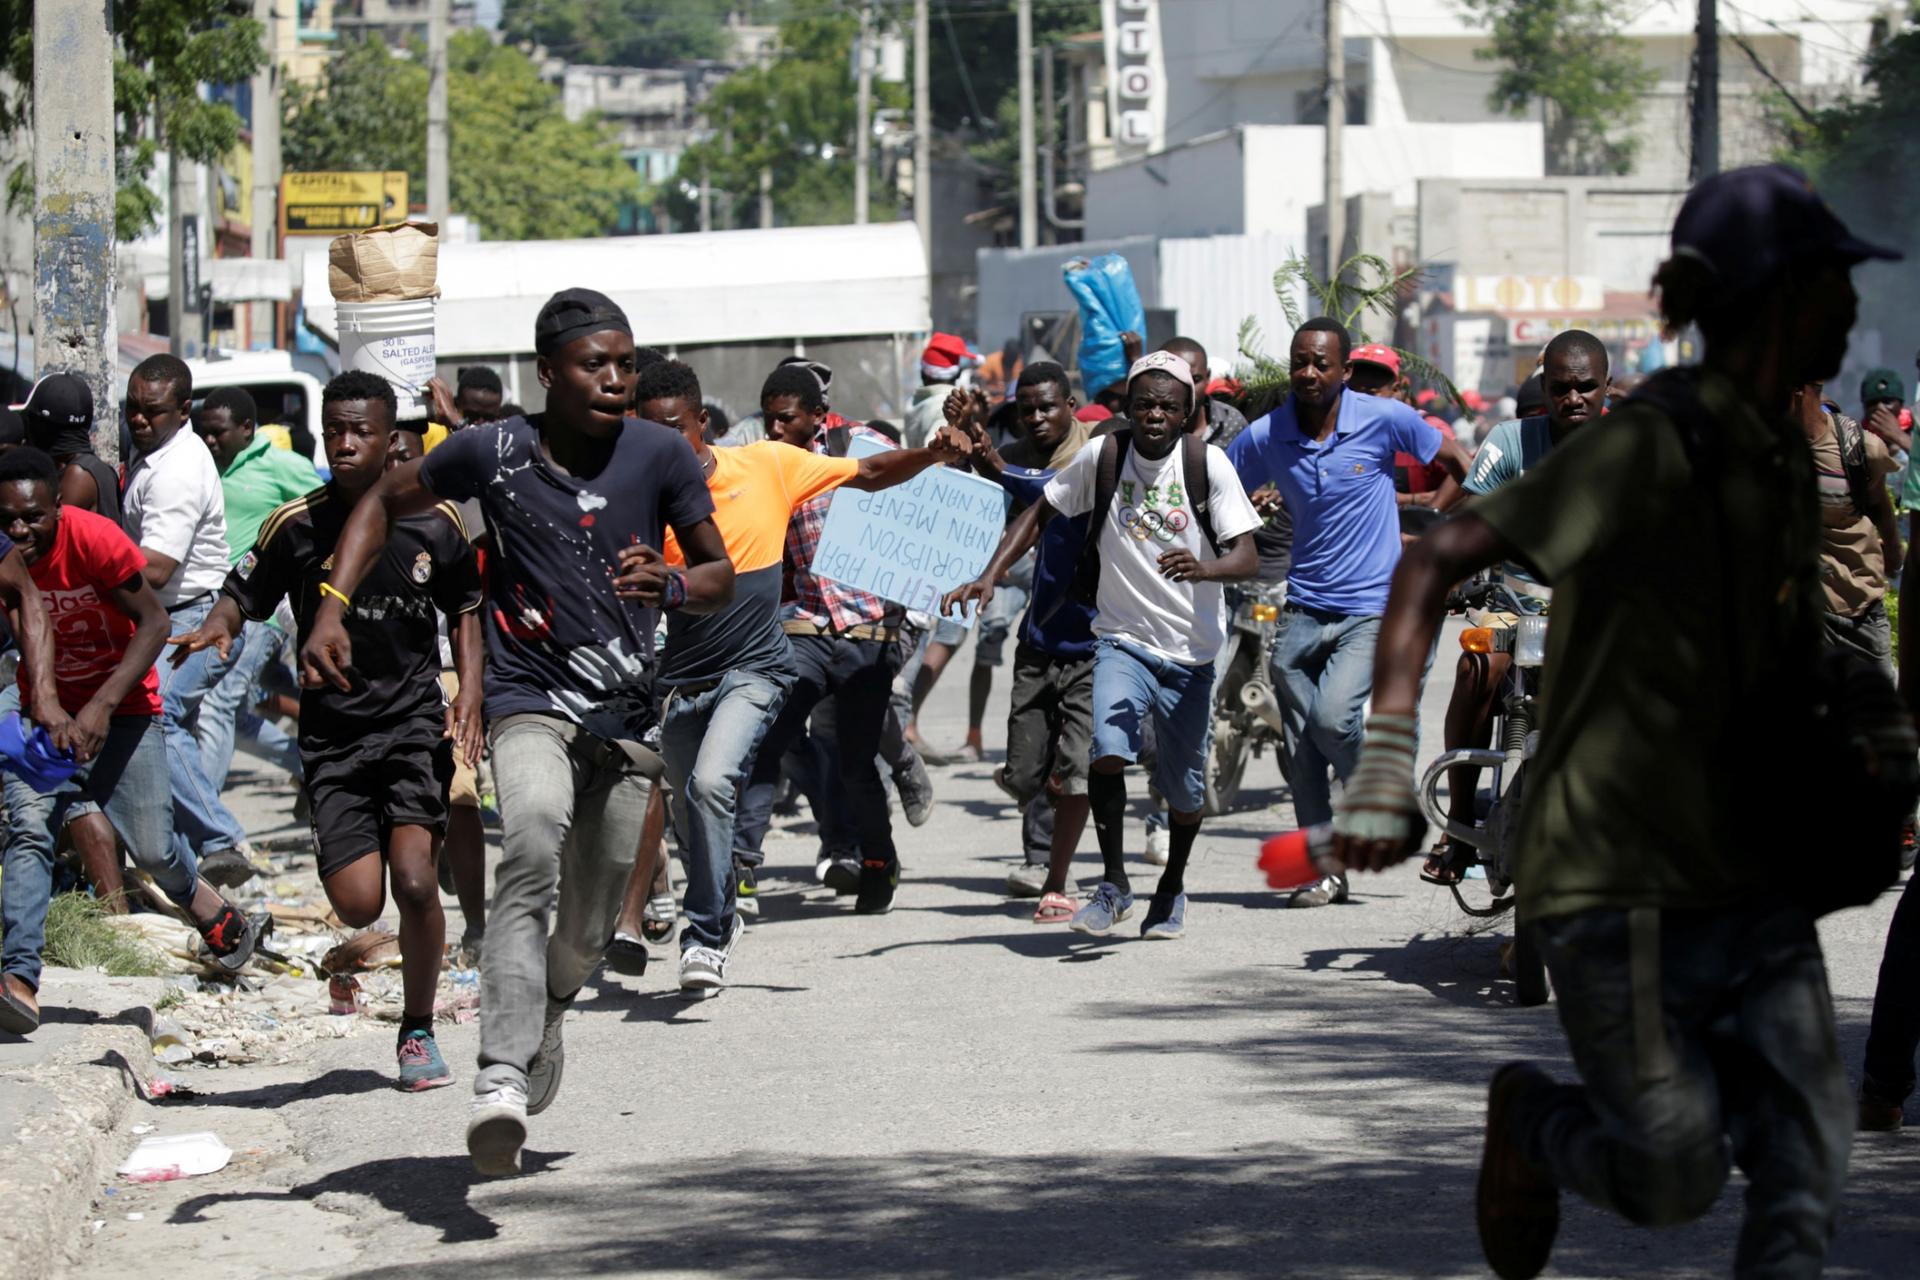 A large group of protesters are shown running in the street.